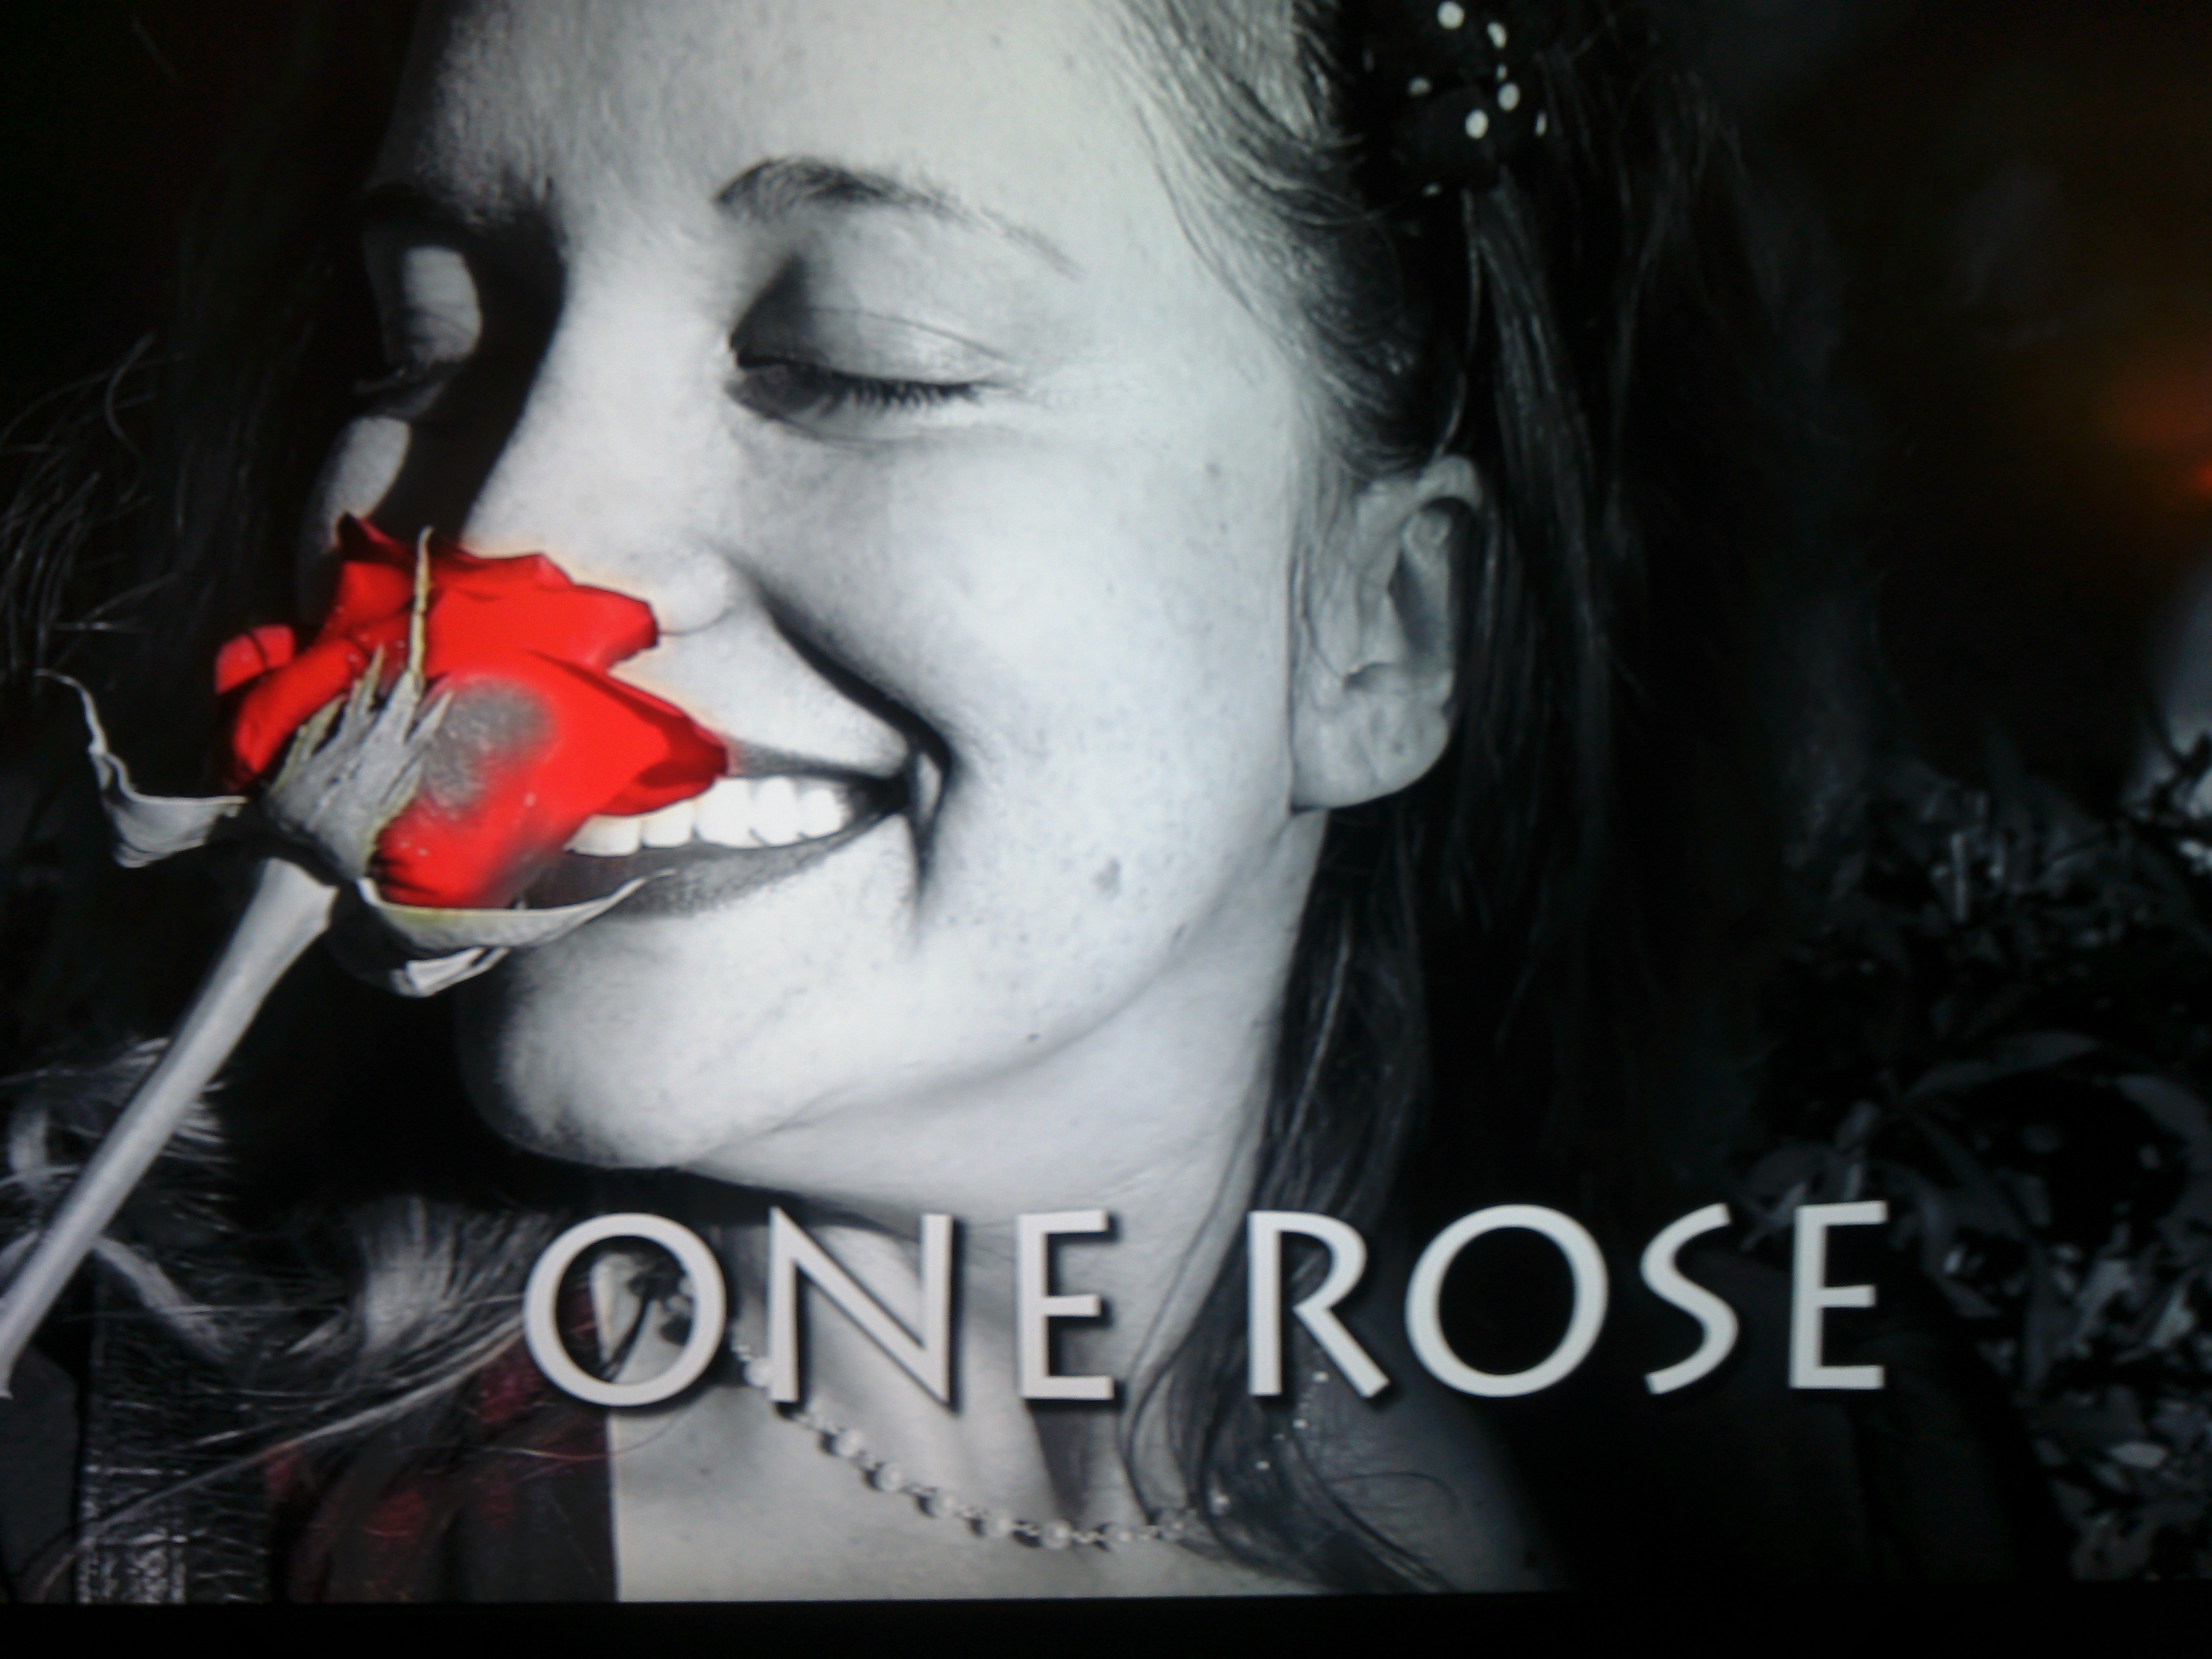 One Rose, Produced, written and directed by David Polcino, co-starring Renee Rivera.